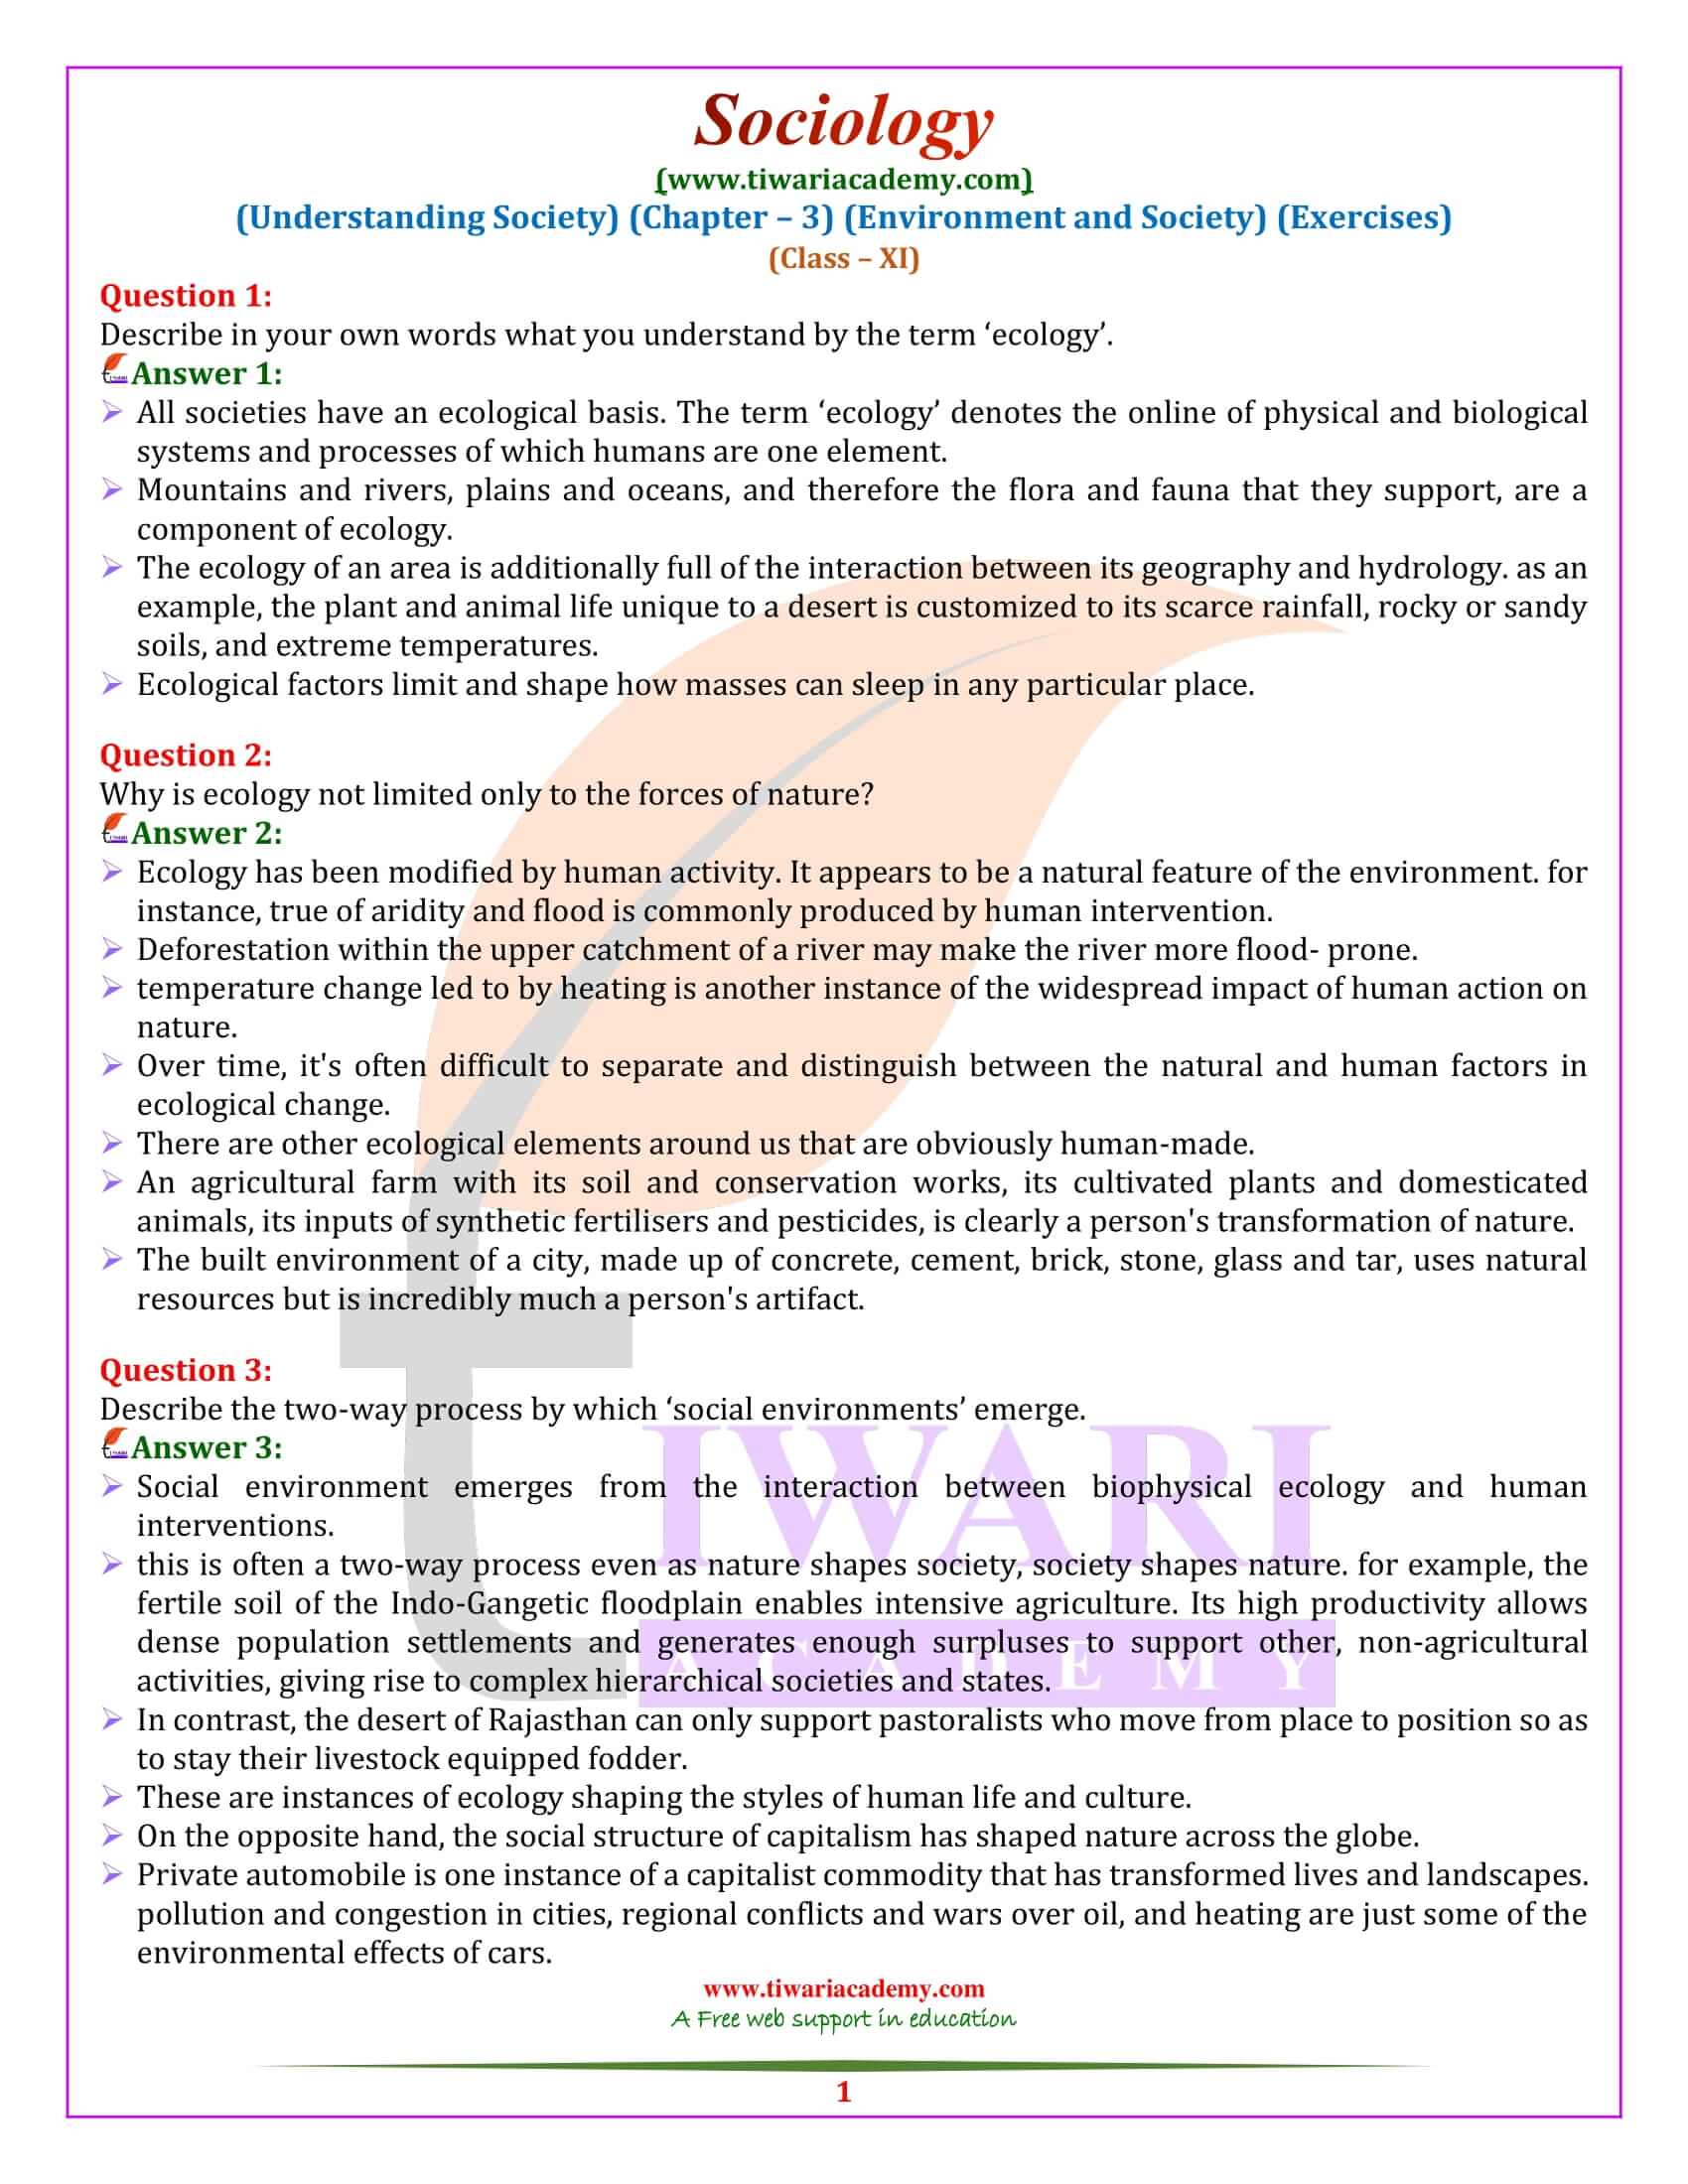 Class 11 Sociology Chapter 3 Environment and Society